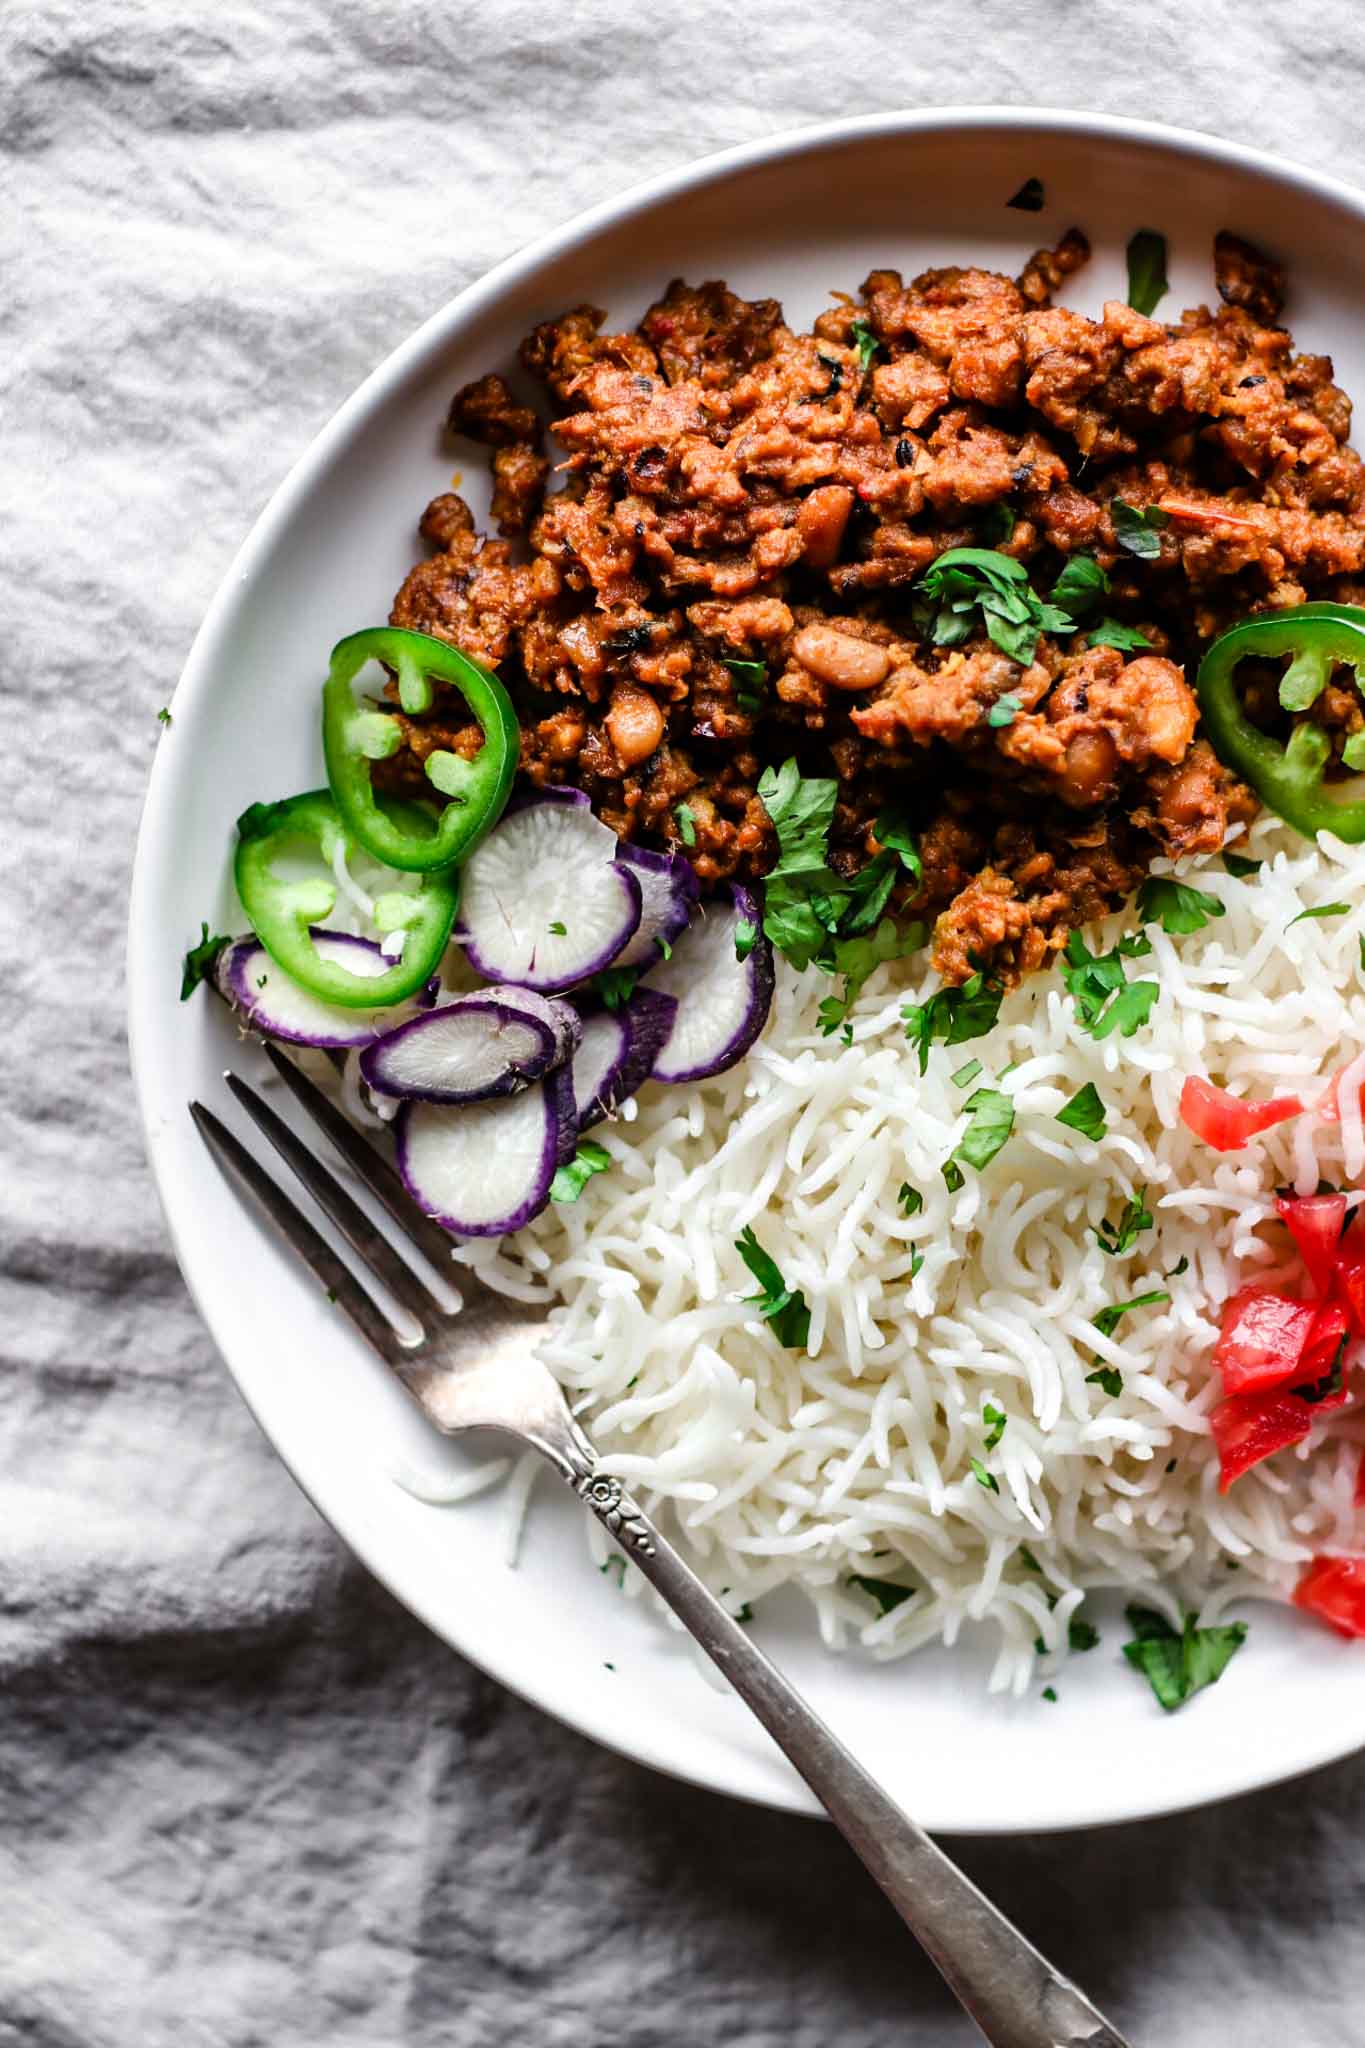 Top view of Keema Lobia on a white plate with a silver fork with rice and vegetables.